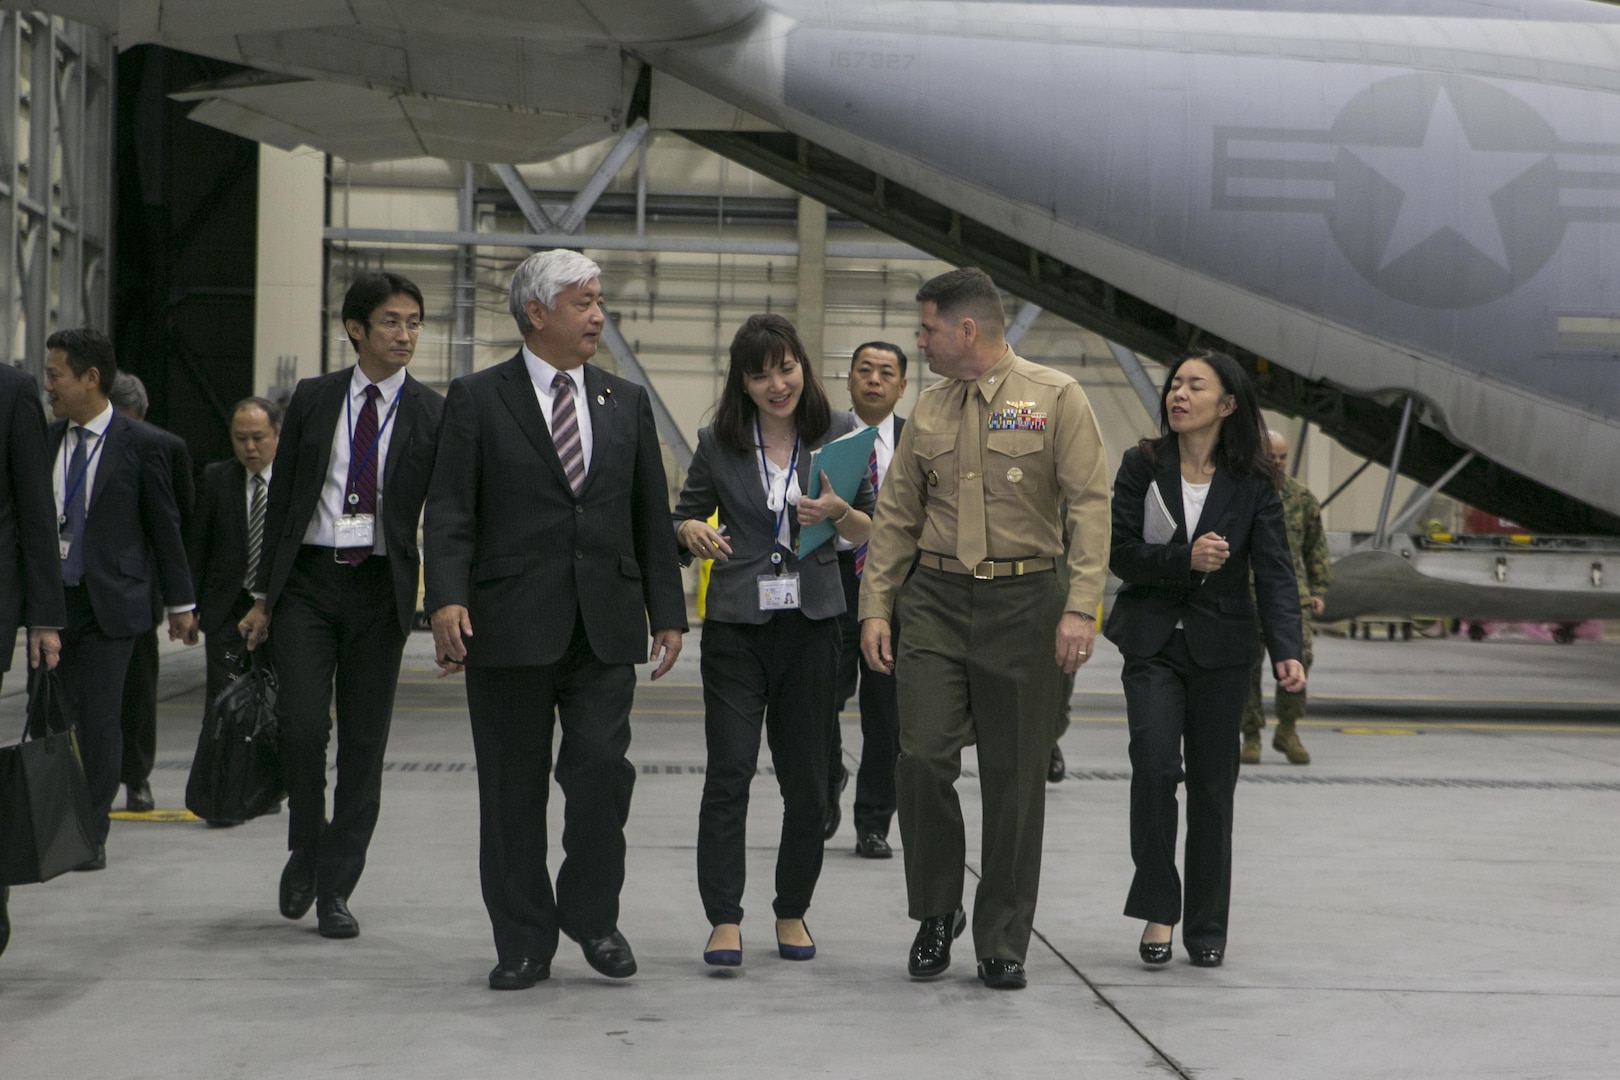 Gen Nakatani, Japanese Defense Minister, tours Marine Aerial Refueler Transport Squadron (VMGR) 152 facilities during his visit to Marine Corps Air Station Iwakuni, Japan, Dec. 2, 2015. Station officials welcomed Nakatani before touring VMGR-152 and the air traffic control tower. This visit built a stronger bilateral understanding between station personnel and Japanese officials. (U.S. Marine Corps photo by Cpl. Carlos Cruz Jr./Released)